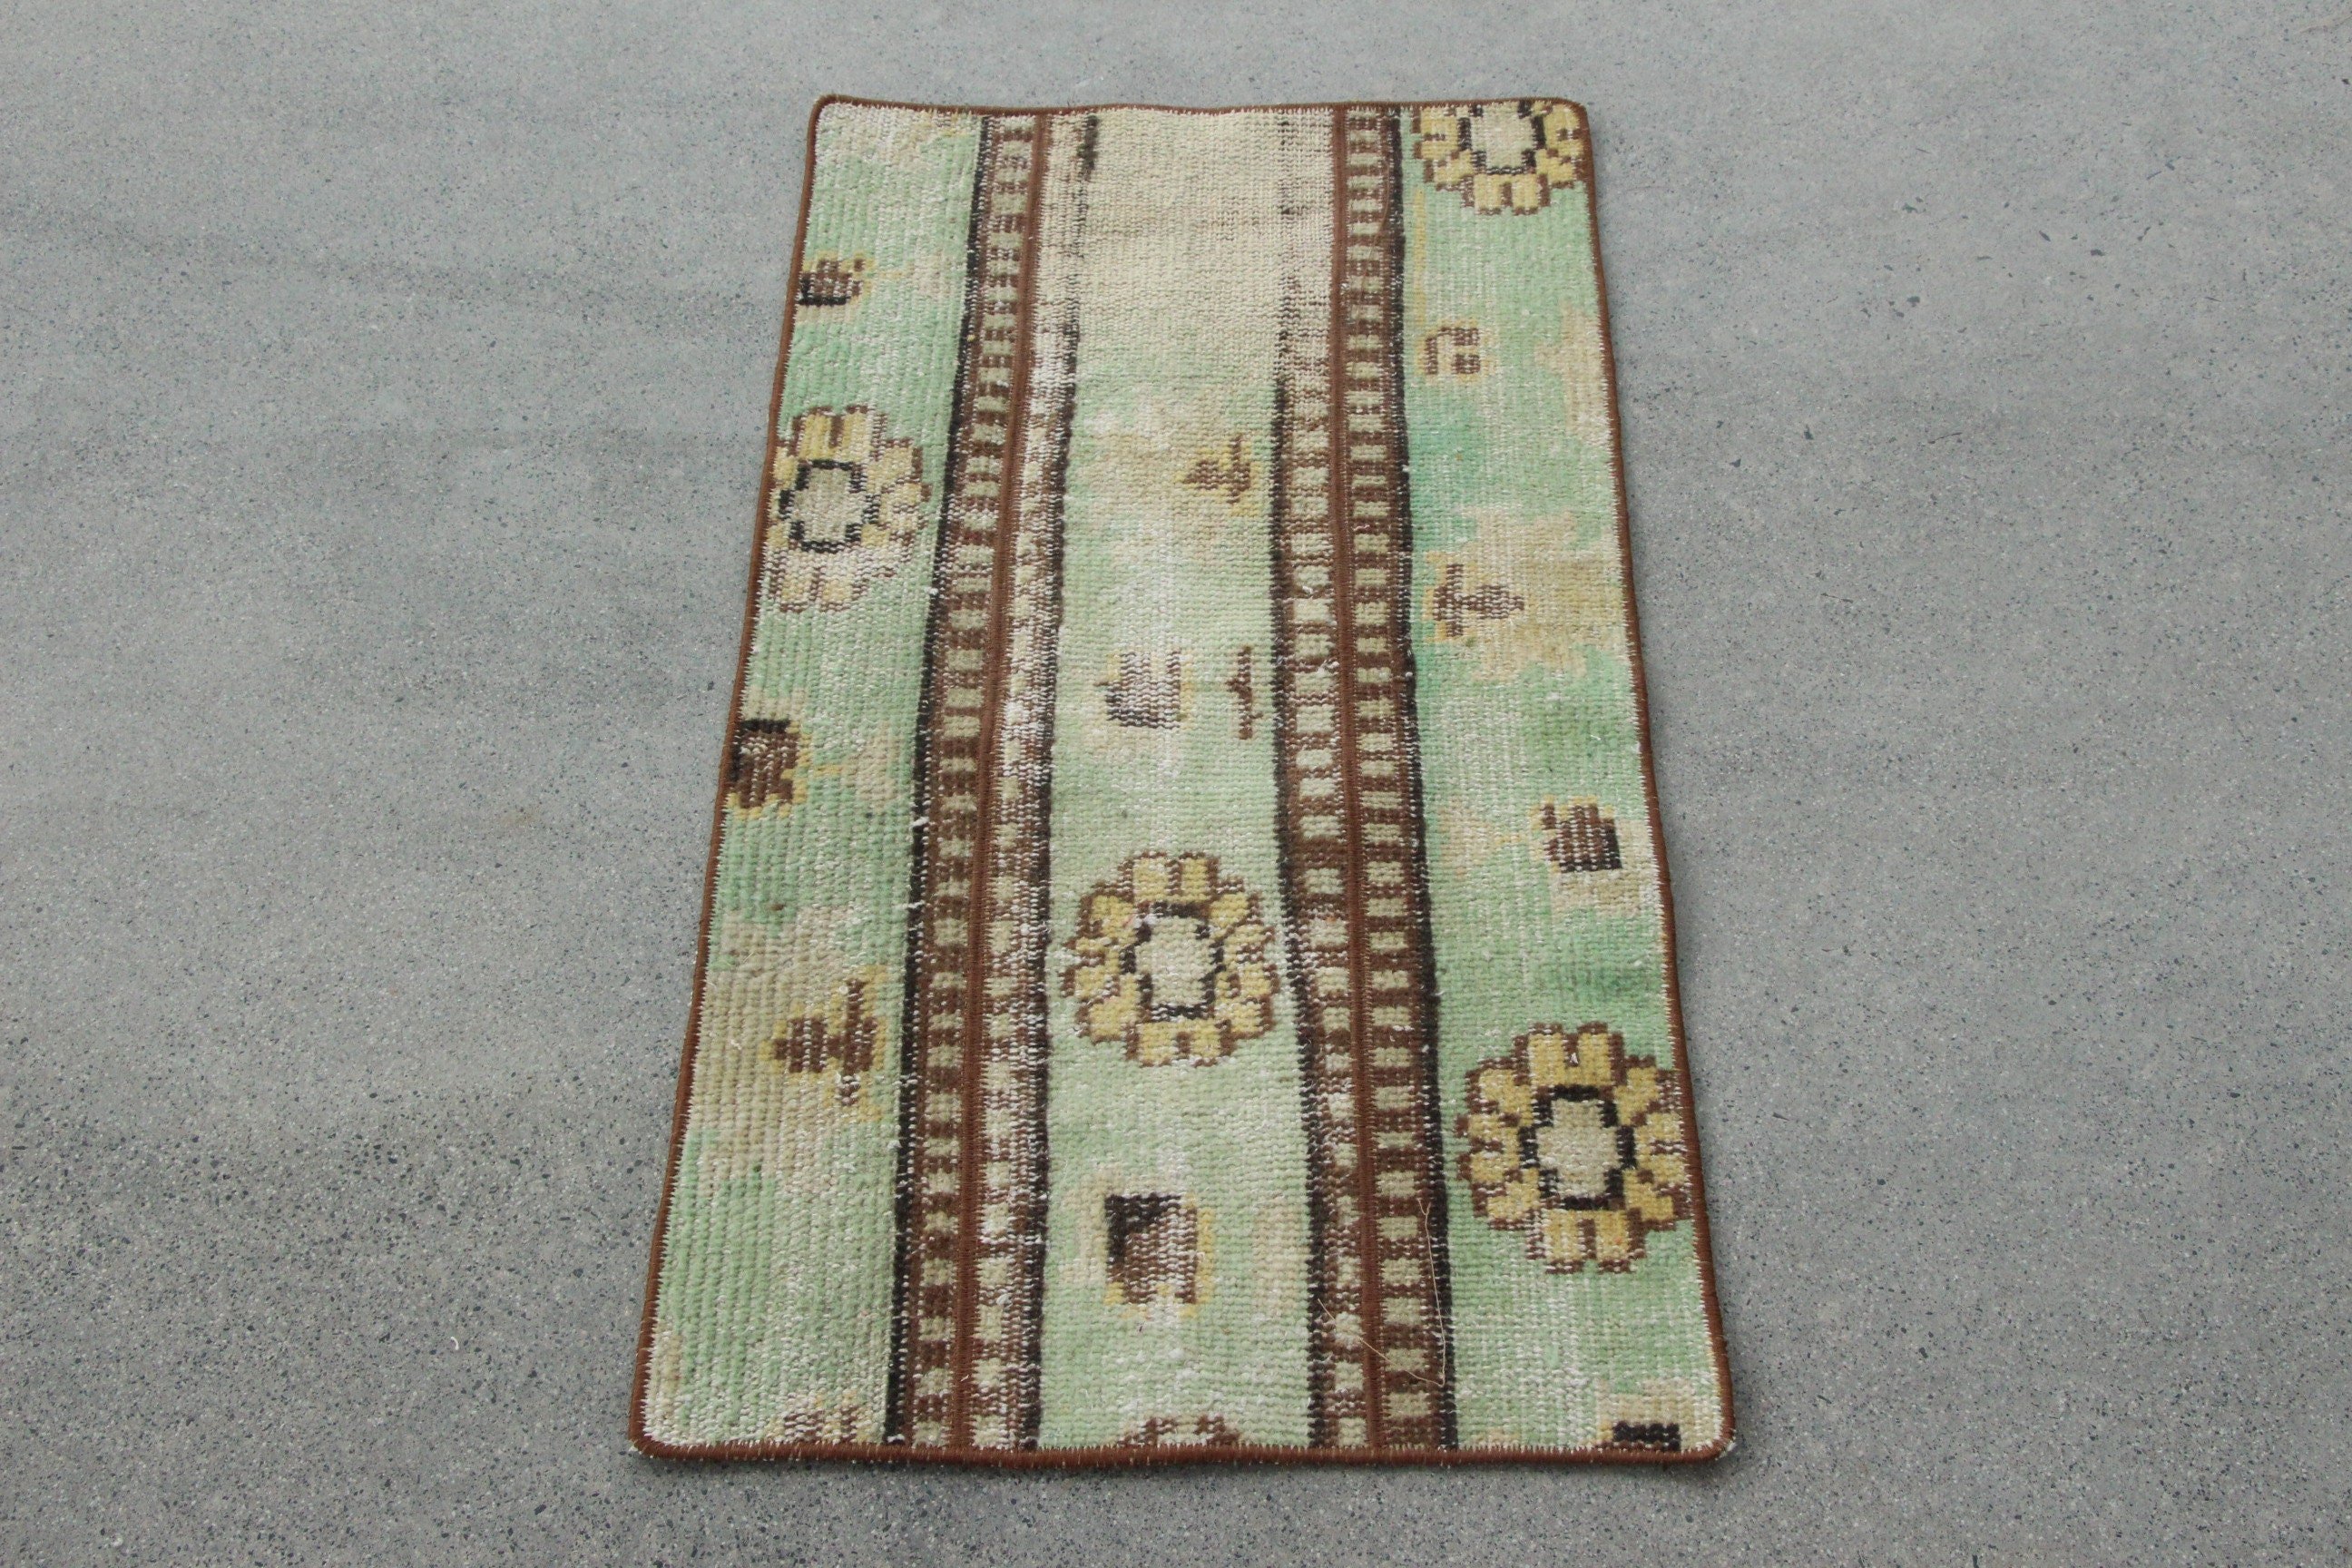 Vintage Rugs, Brown Anatolian Rug, Retro Rug, Moroccan Rug, 1.6x3 ft Small Rug, Kitchen Rugs, Wall Hanging Rug, Rugs for Entry, Turkish Rug